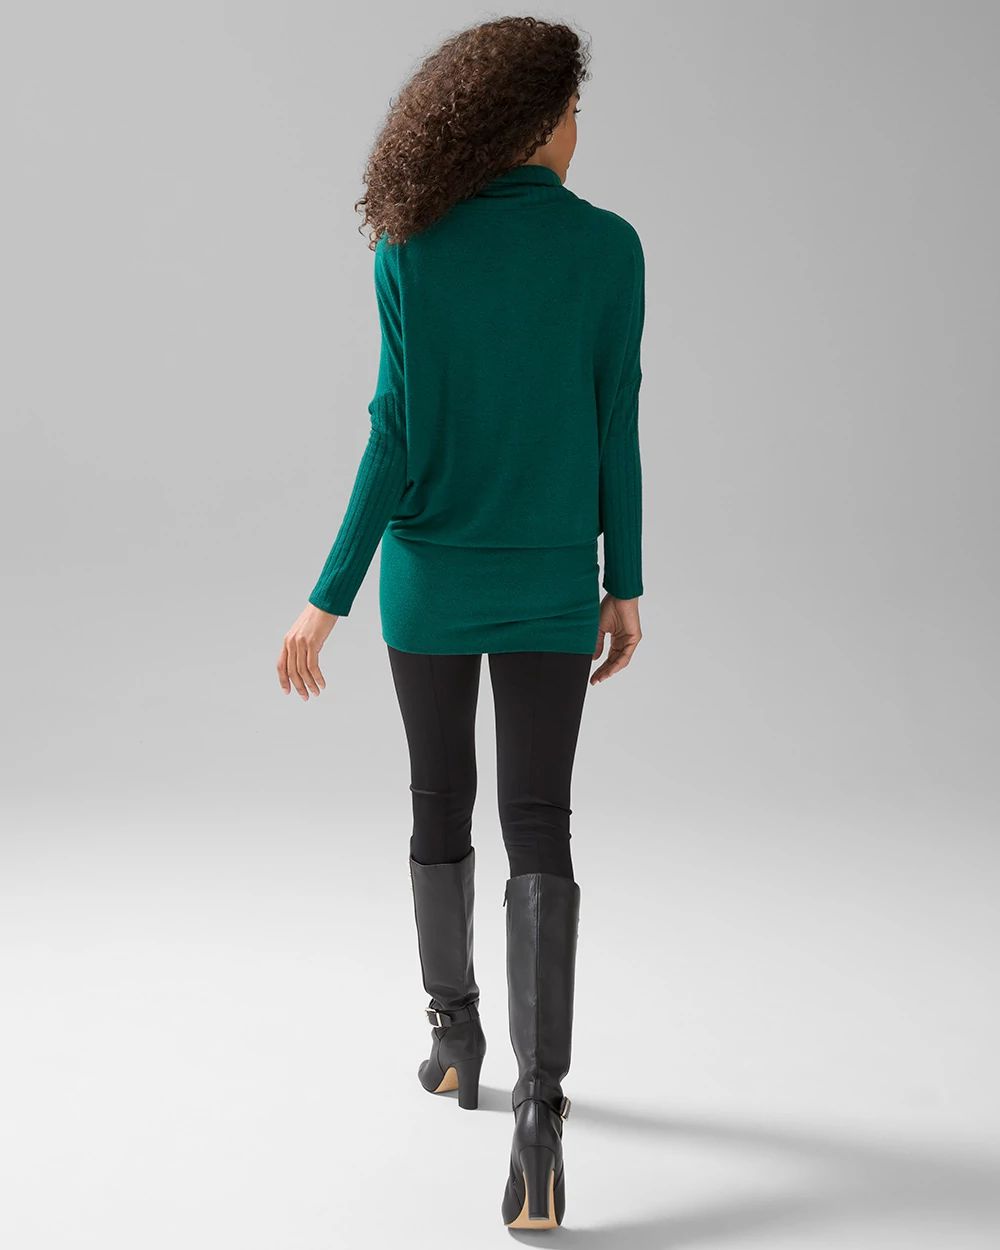 Long Sleeve Sweater Knit Tunic click to view larger image.